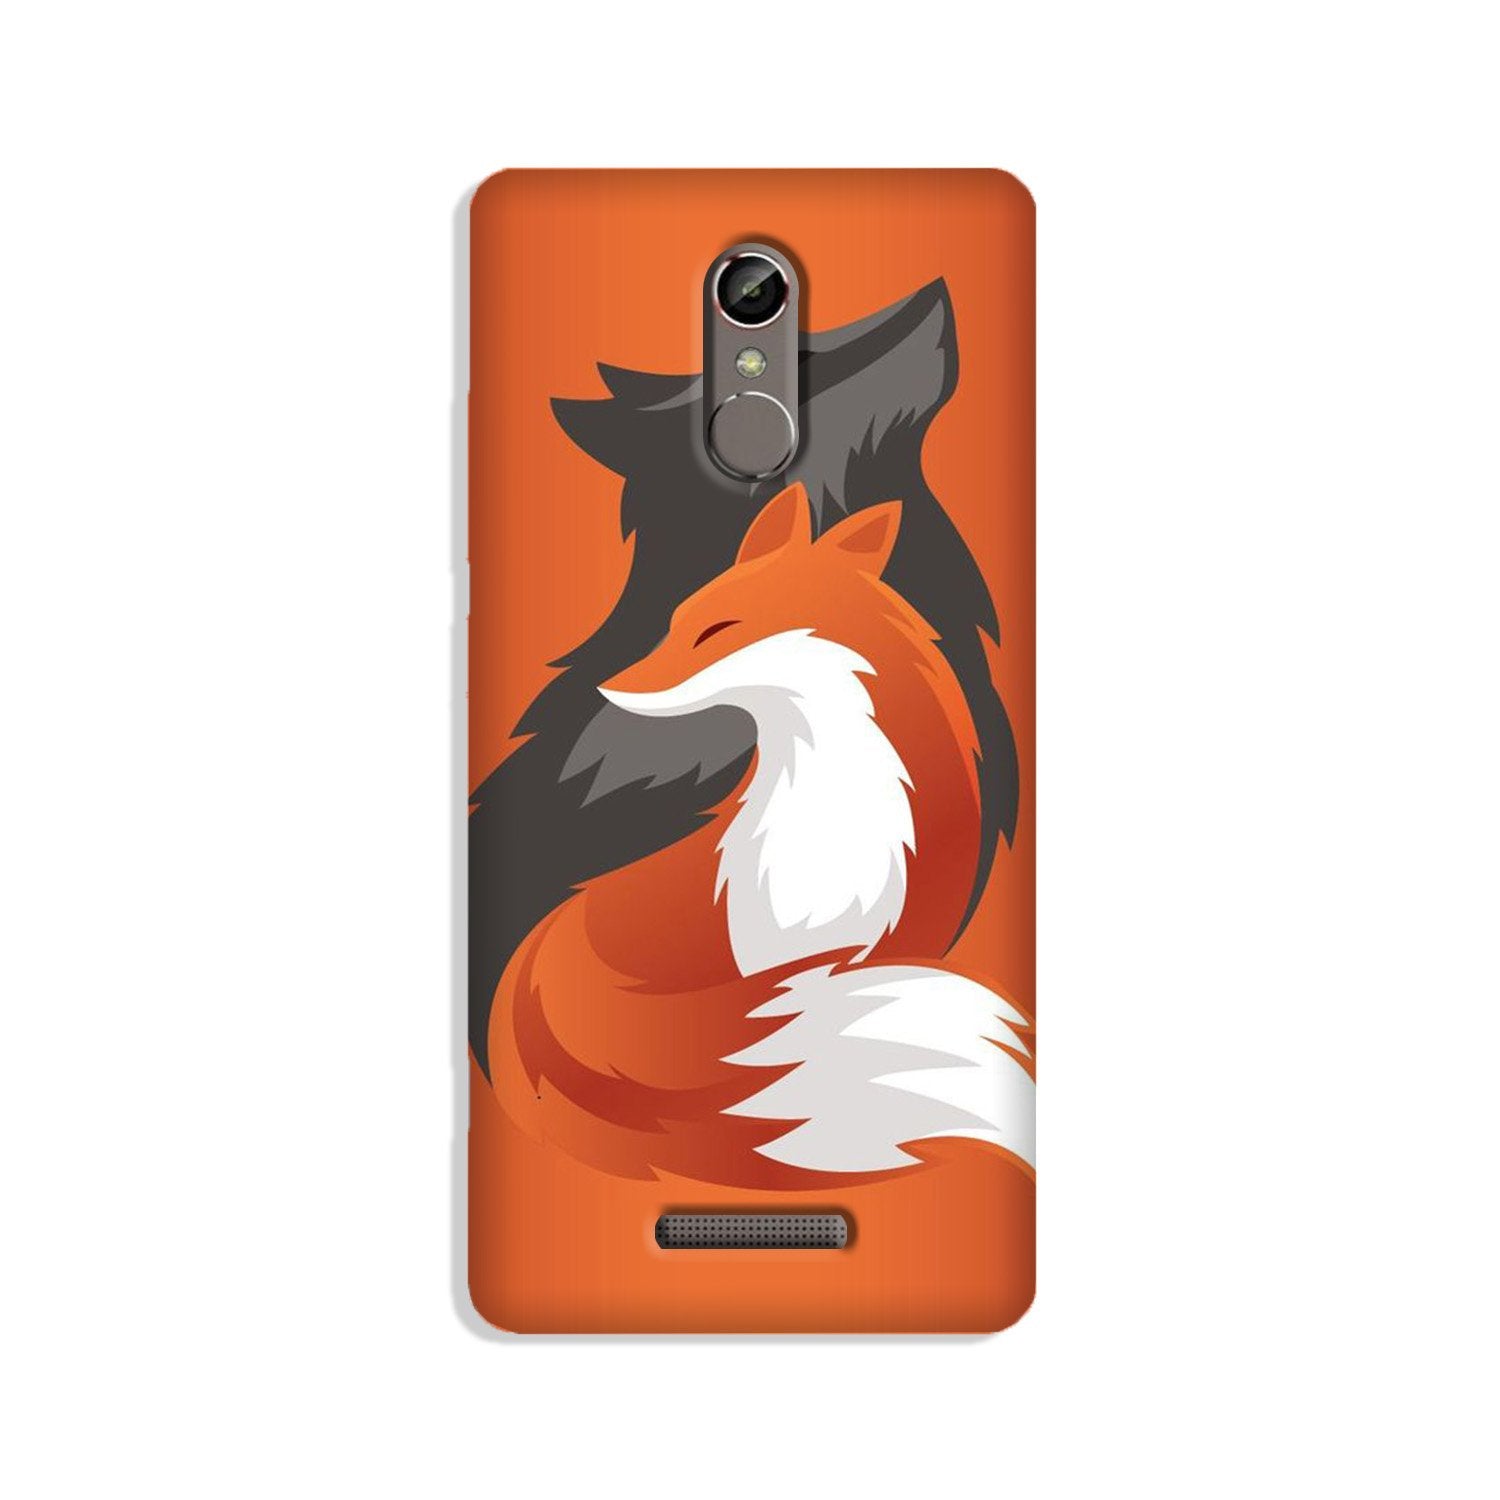 Wolf  Case for Gionee S6s (Design No. 224)